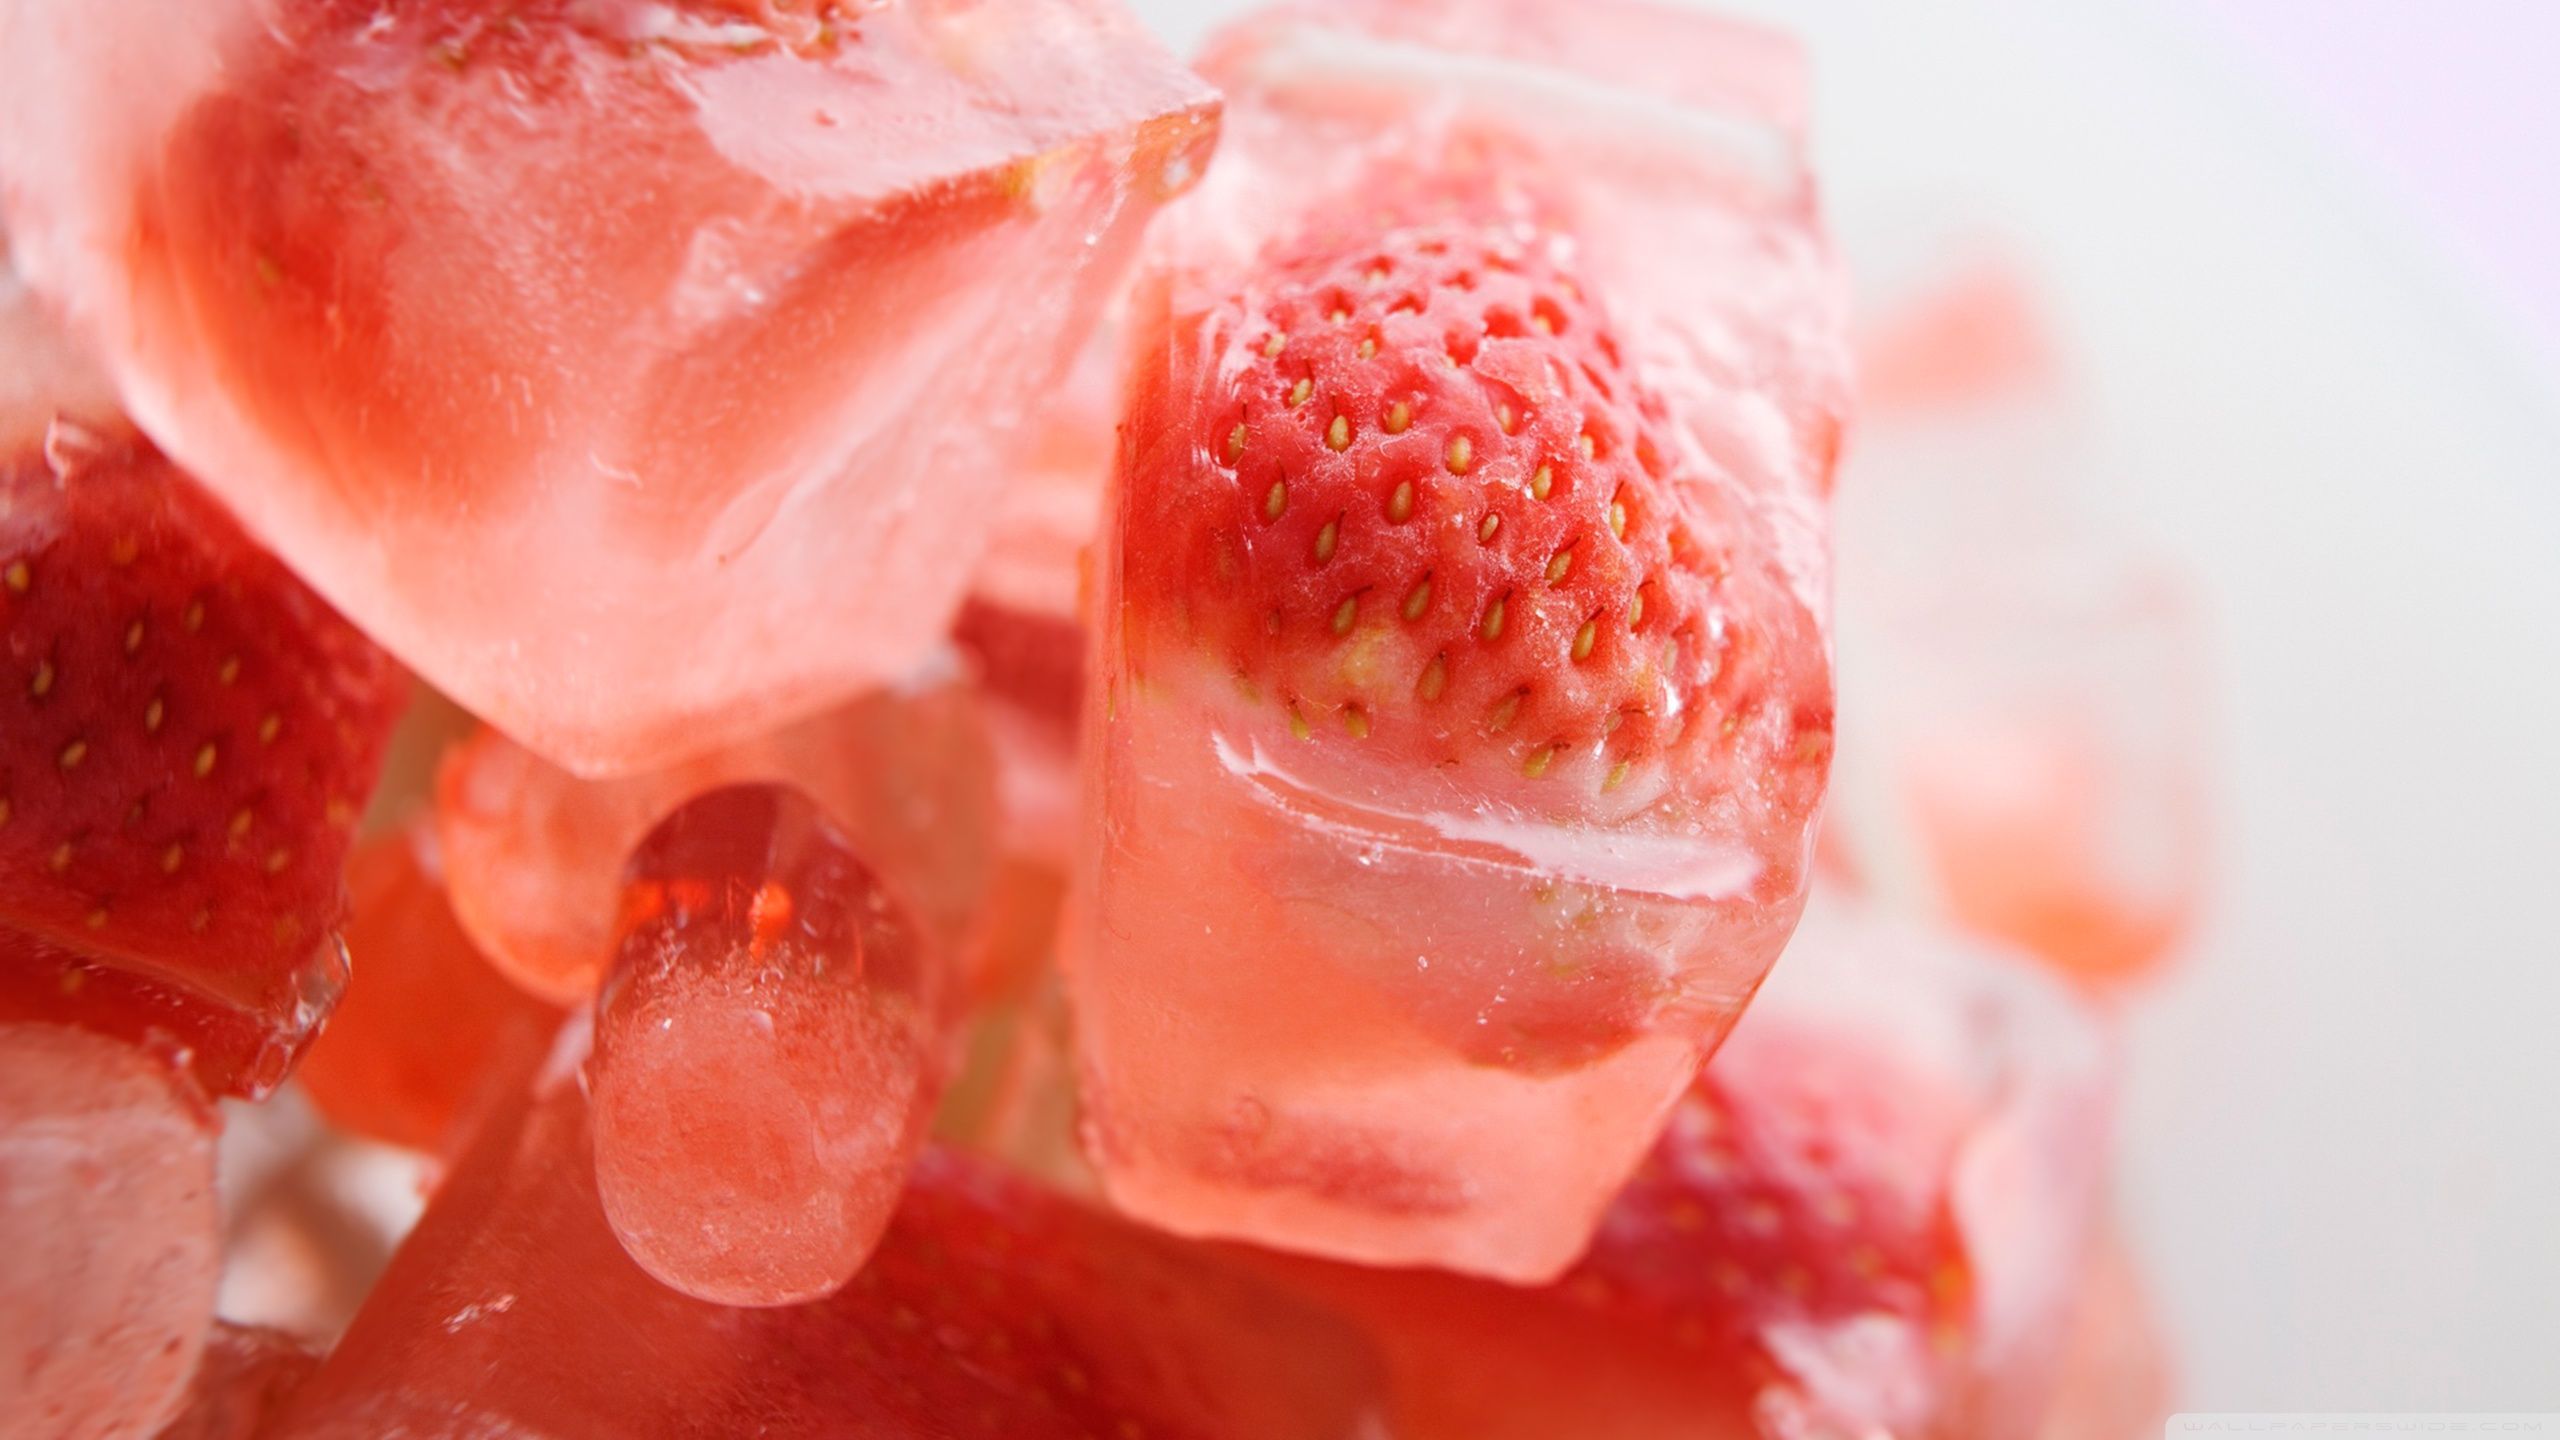 Strawberry on ice cubes HD Wallpaper Cupcakepedia. Strawberry, Frozen strawberries, Food